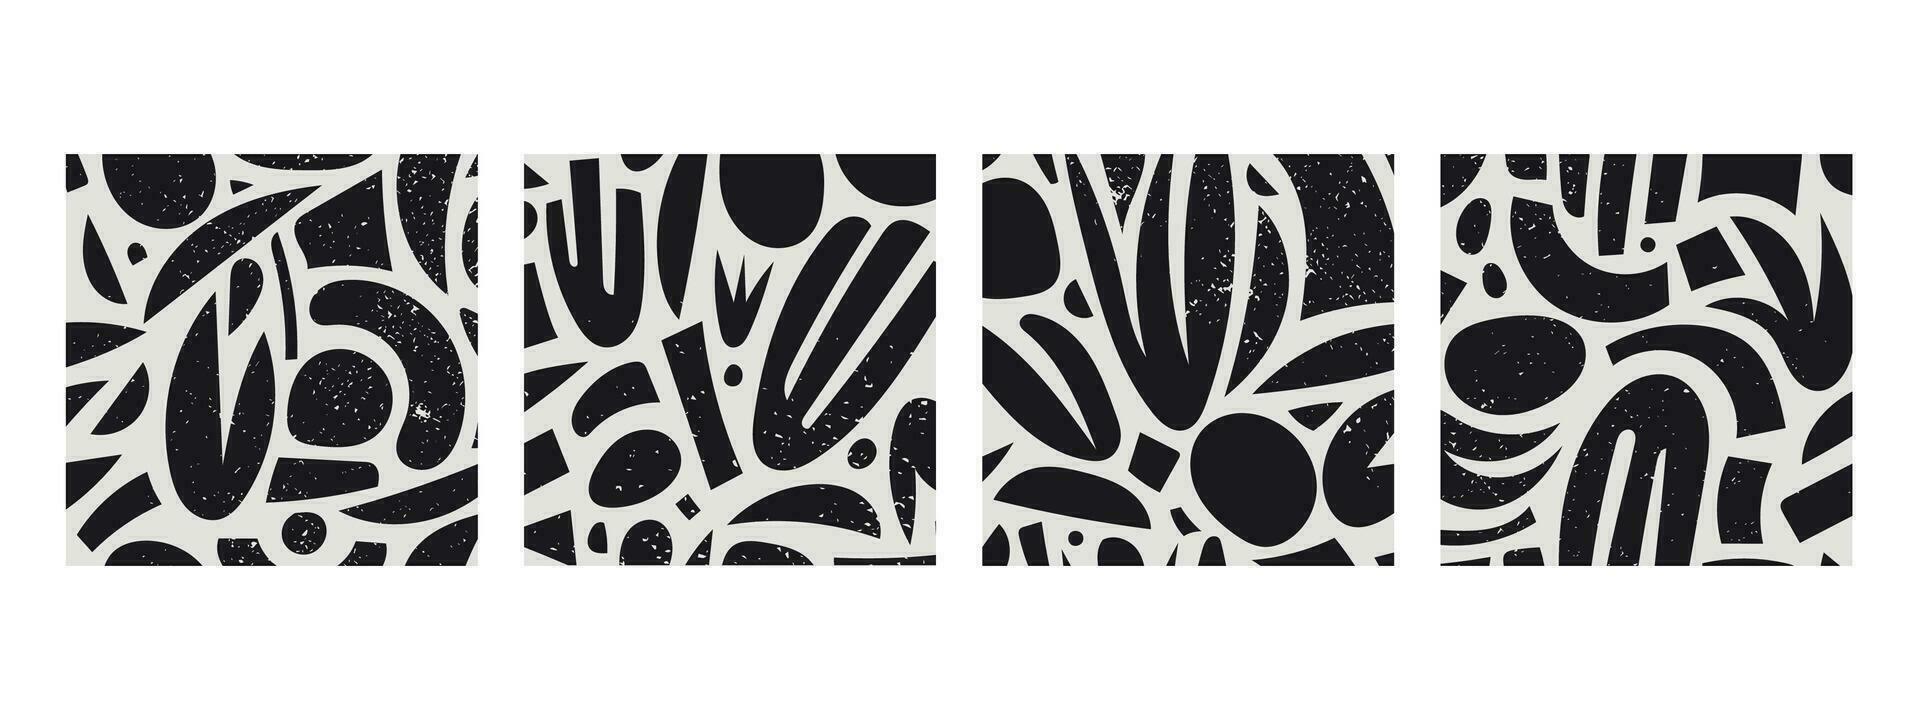 Vector abstract shape cards, black and whit patterns, collage style floral backgrounds with organic wavy, cutout forms. Contemporary art set